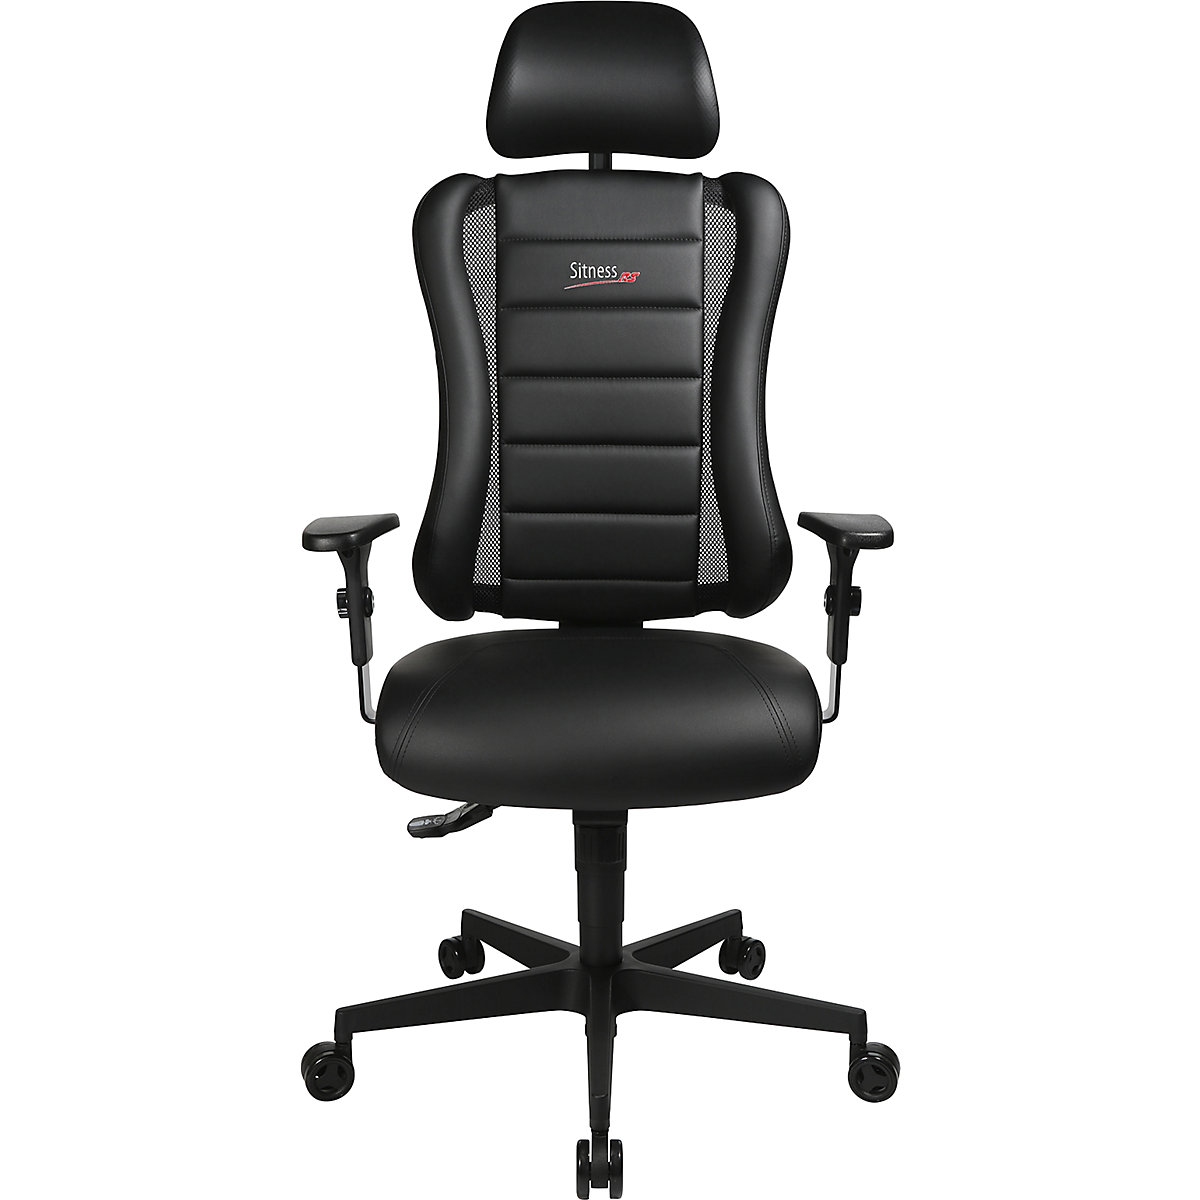 SITNESS RS office swivel chair - Topstar